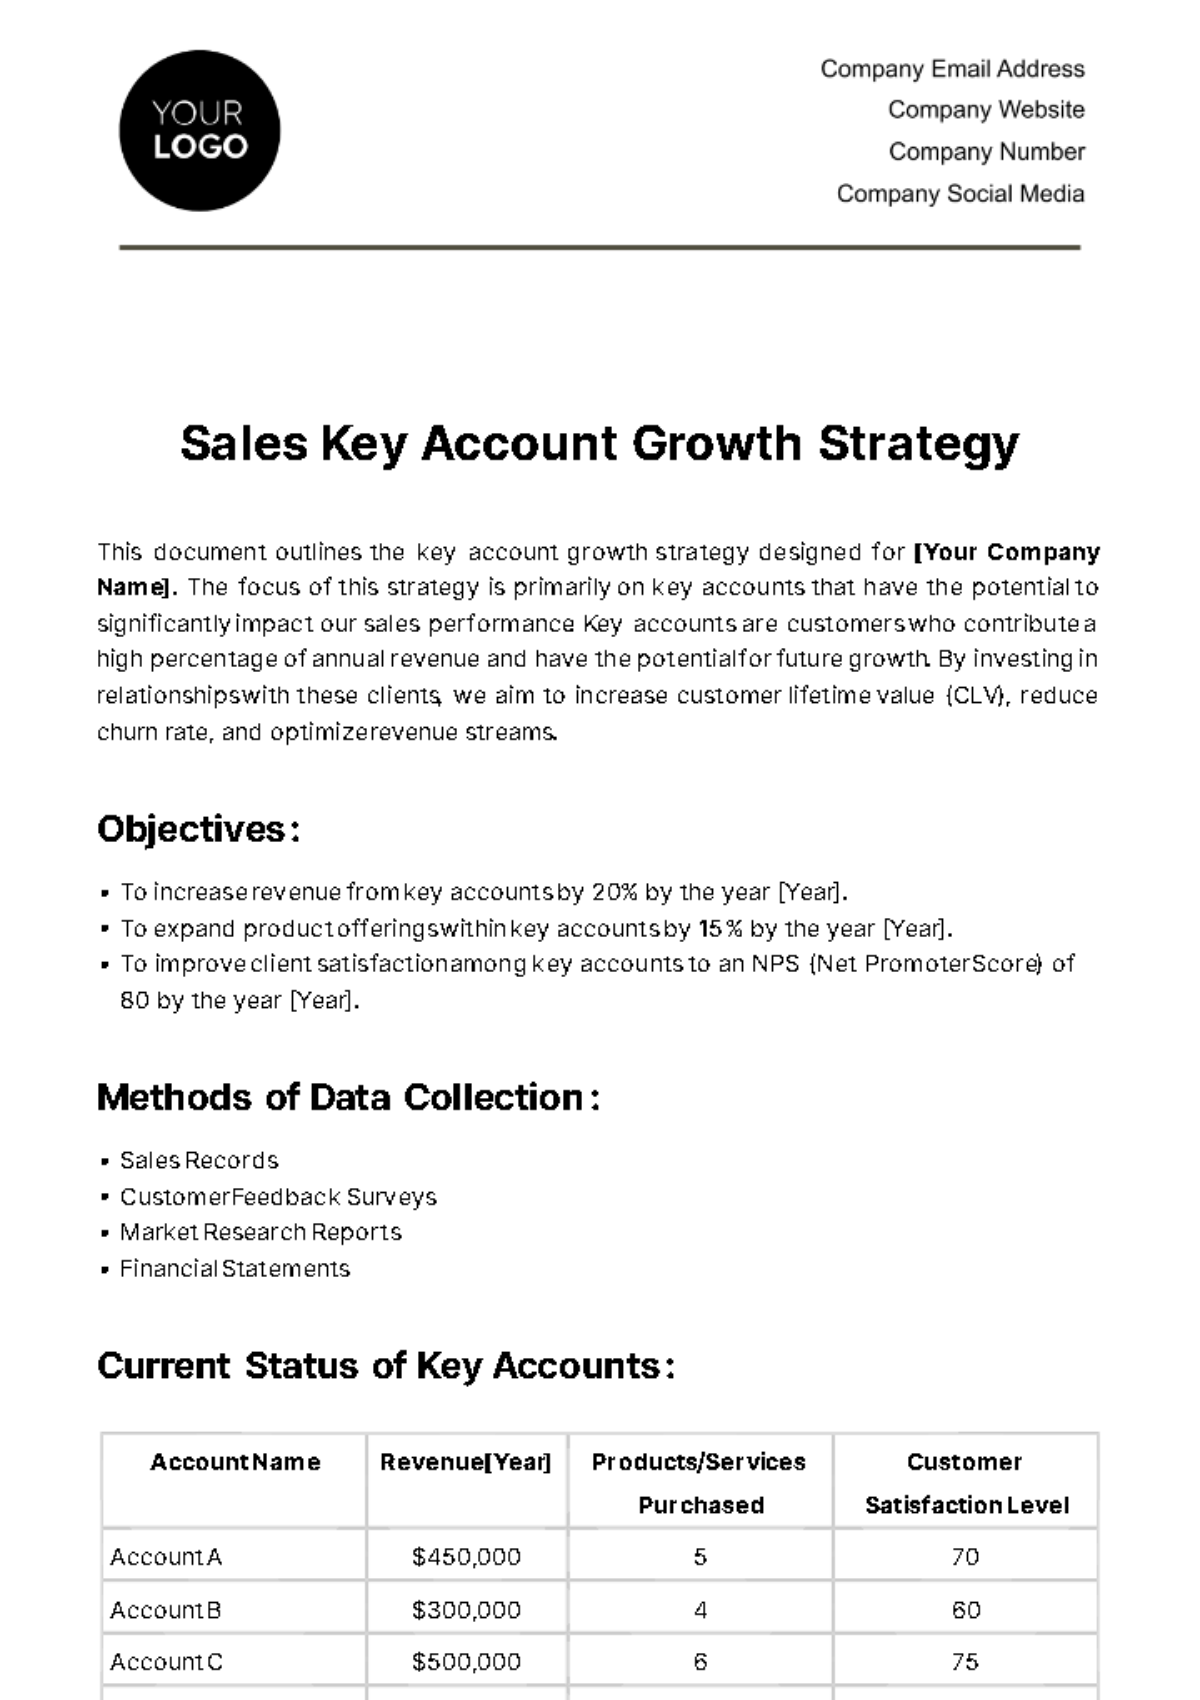 Sales Key Account Growth Strategy Template